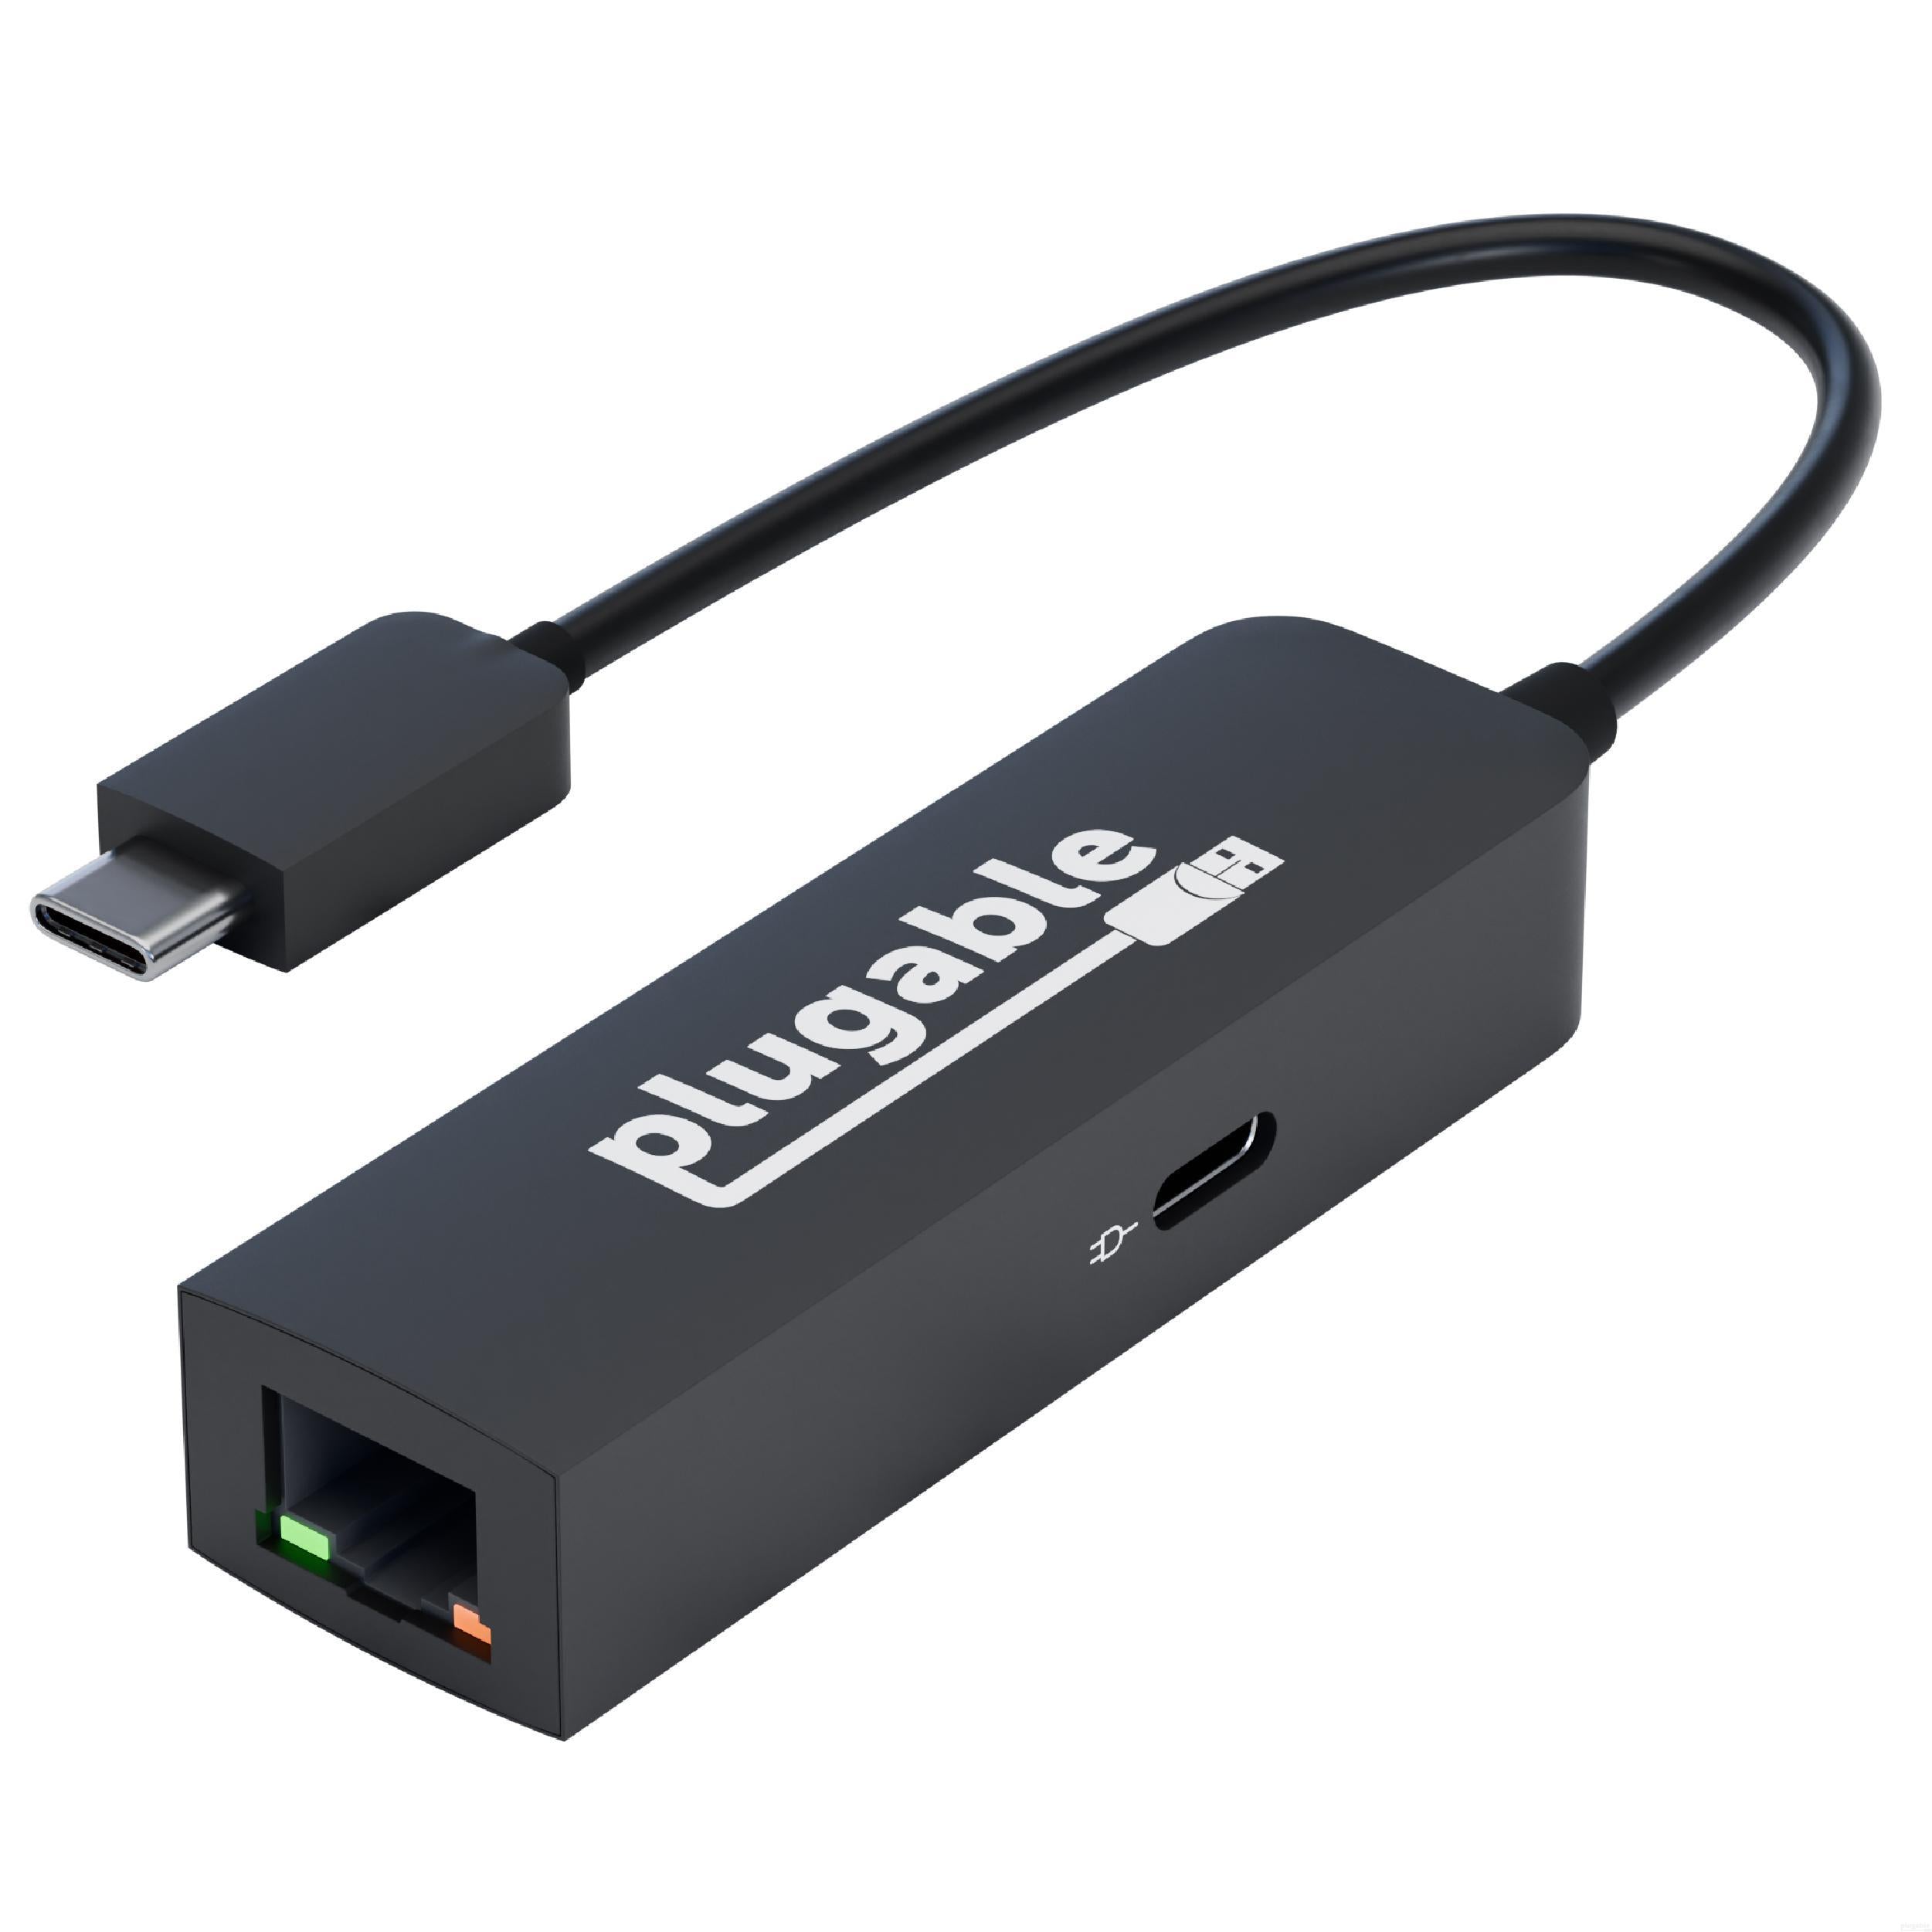 The Plugable 2.5Gbps Network Adapter with Power Delivery